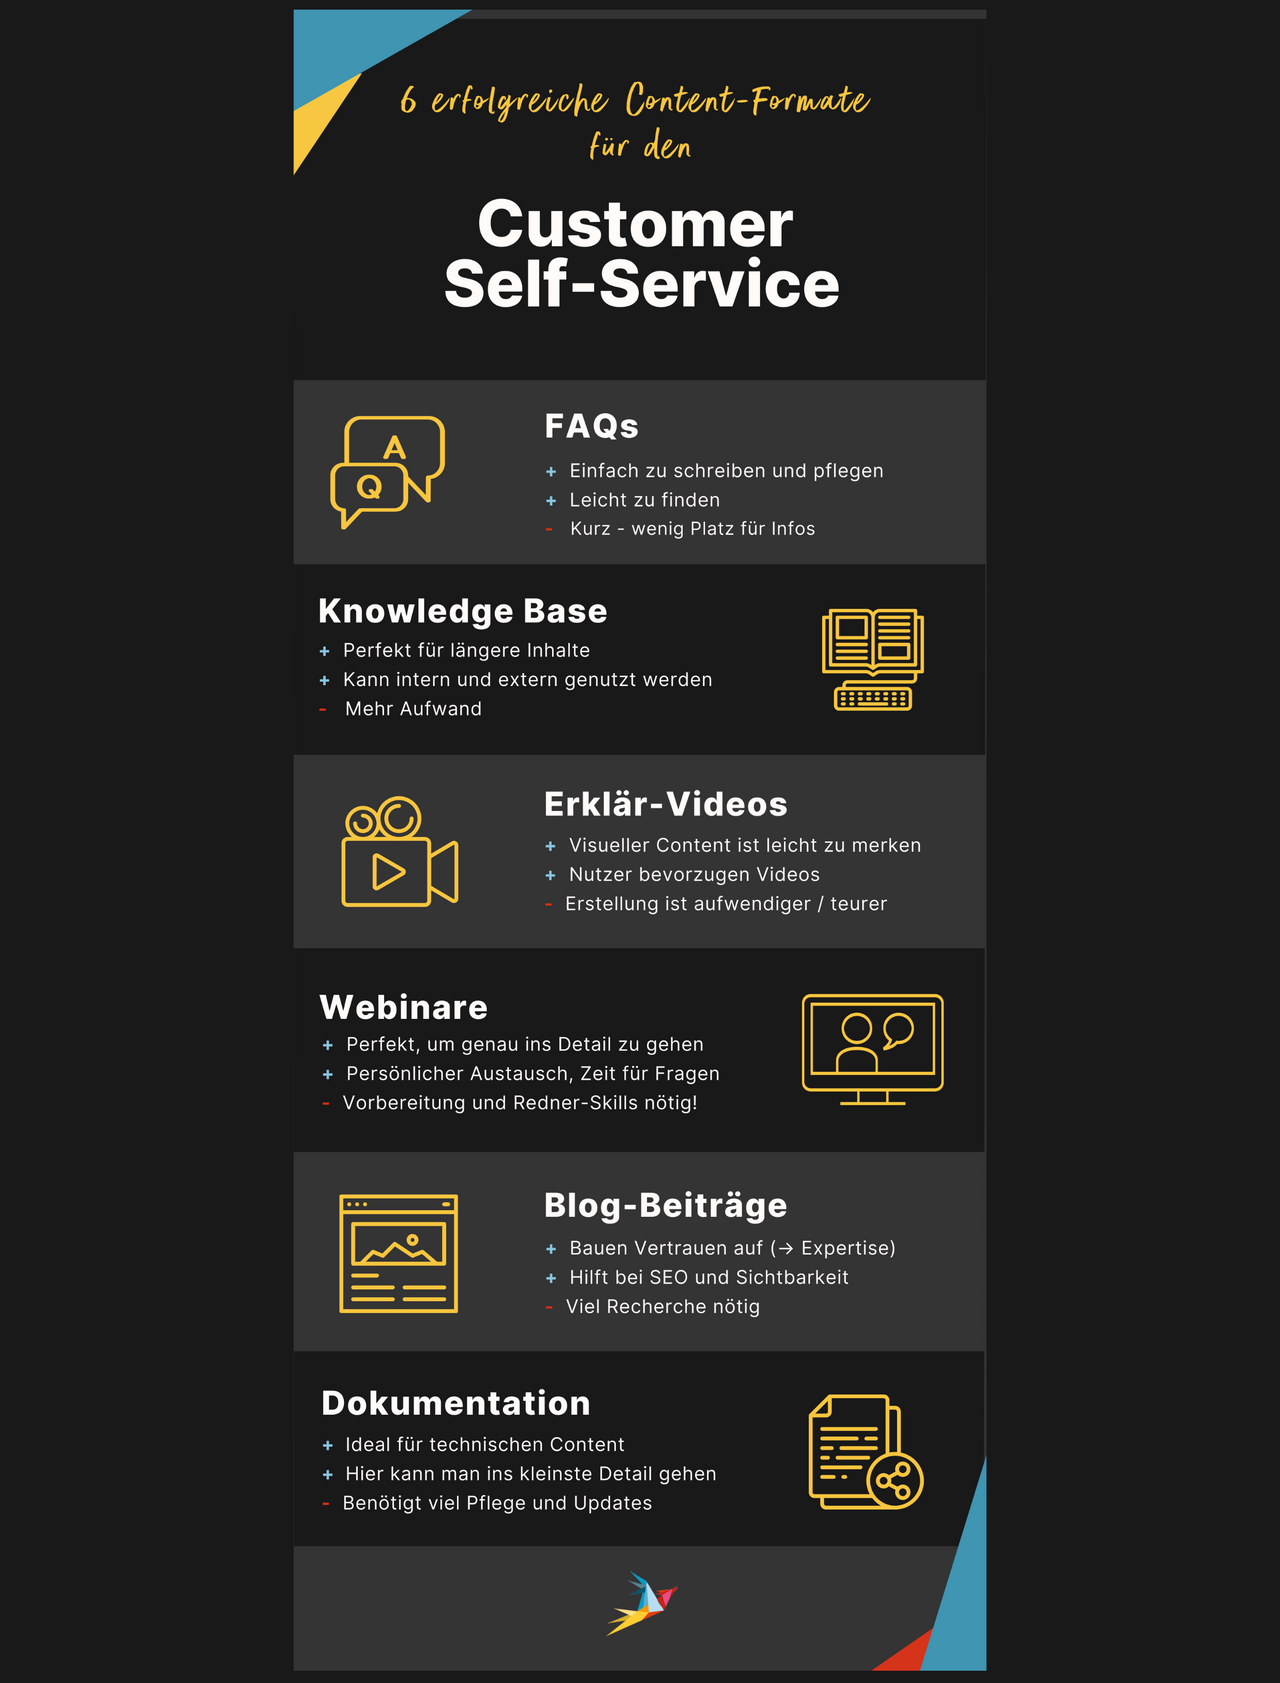 Infographic detailing 6 content formats for self-service customer success